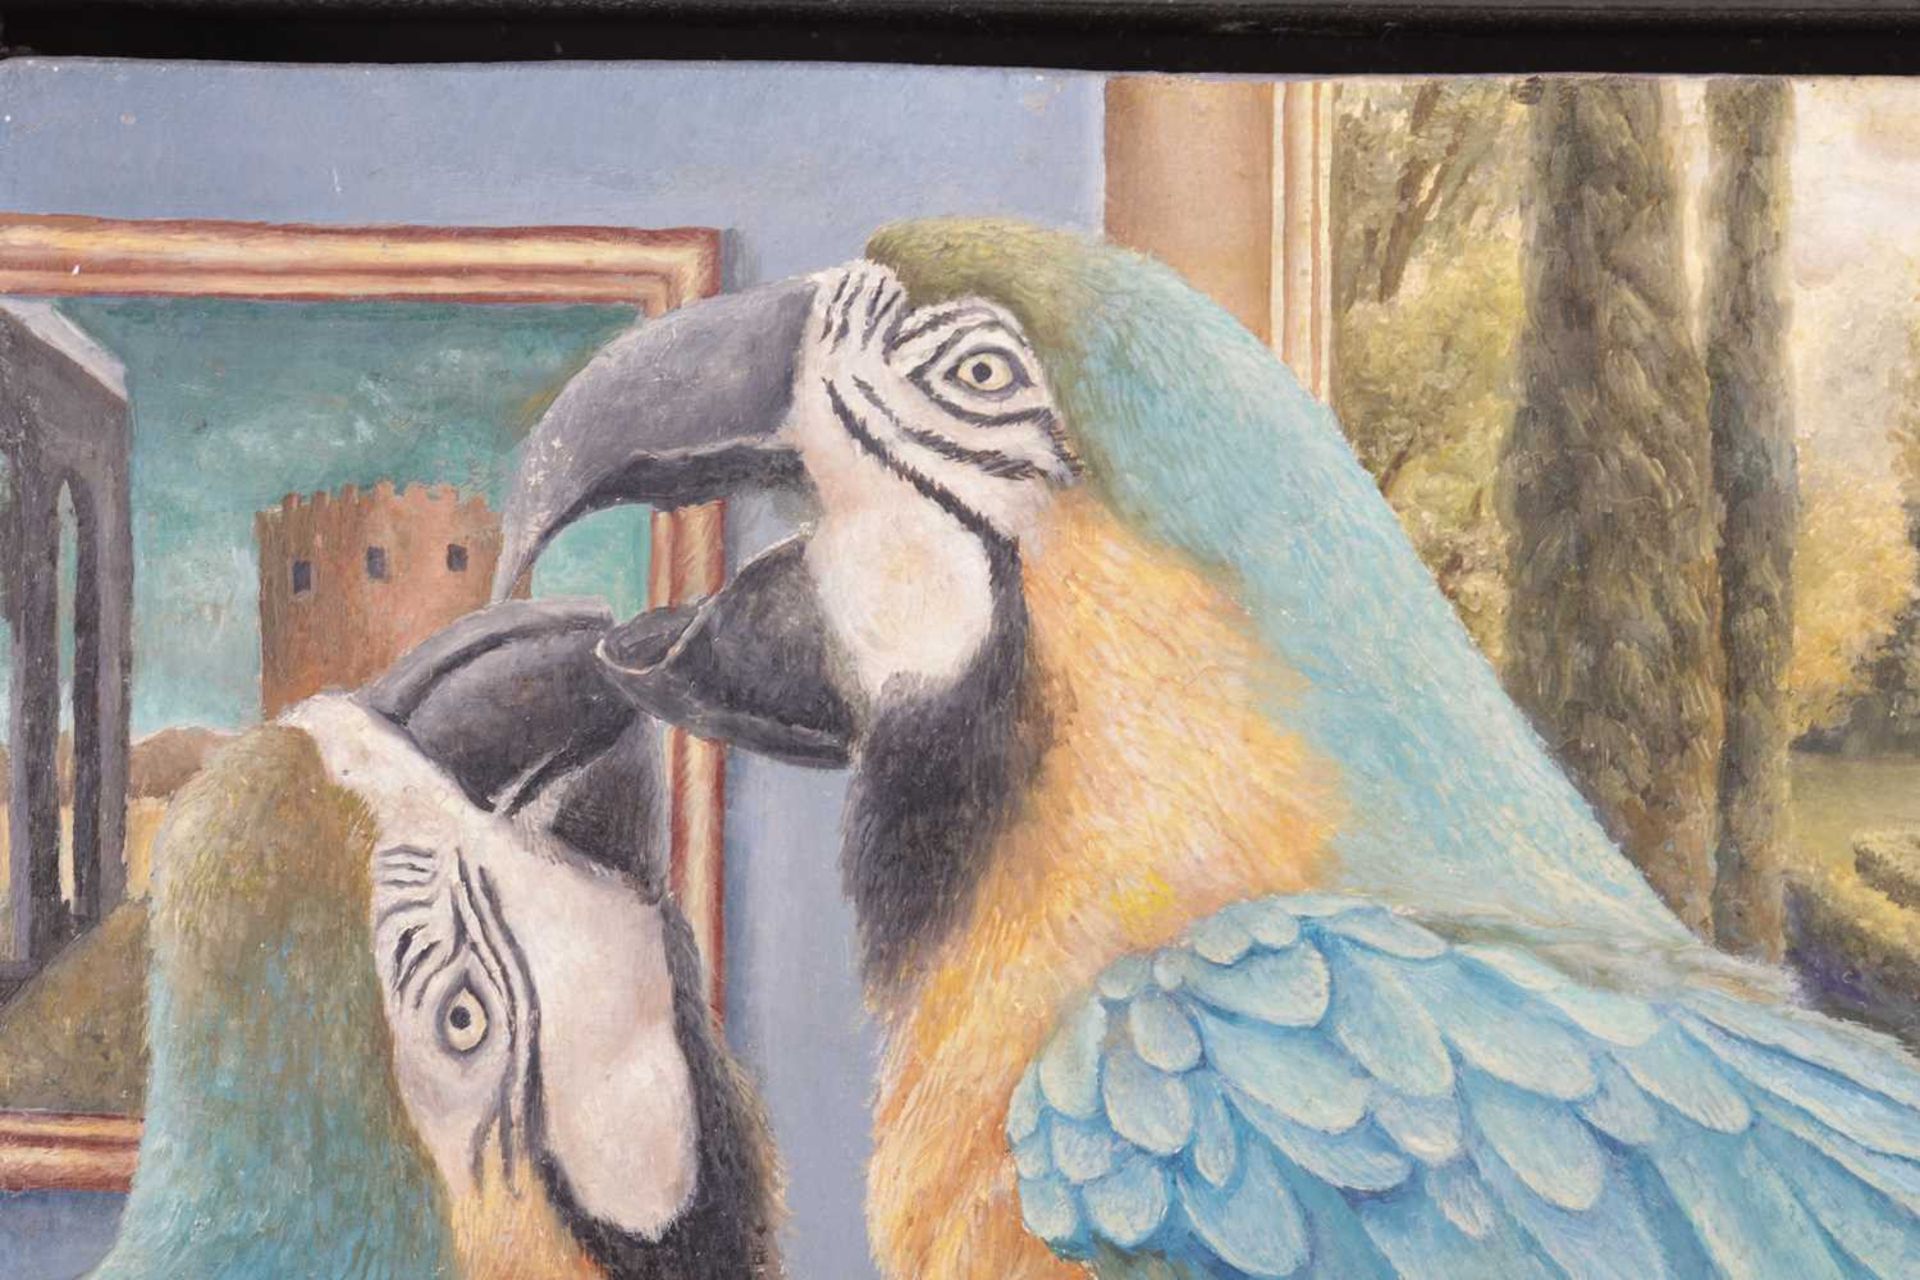 Sally Moore (b.1962), 'Birds of a Feather' (1994), labelled on the reverse, oil on panel, 30 x 52 cm - Image 3 of 12